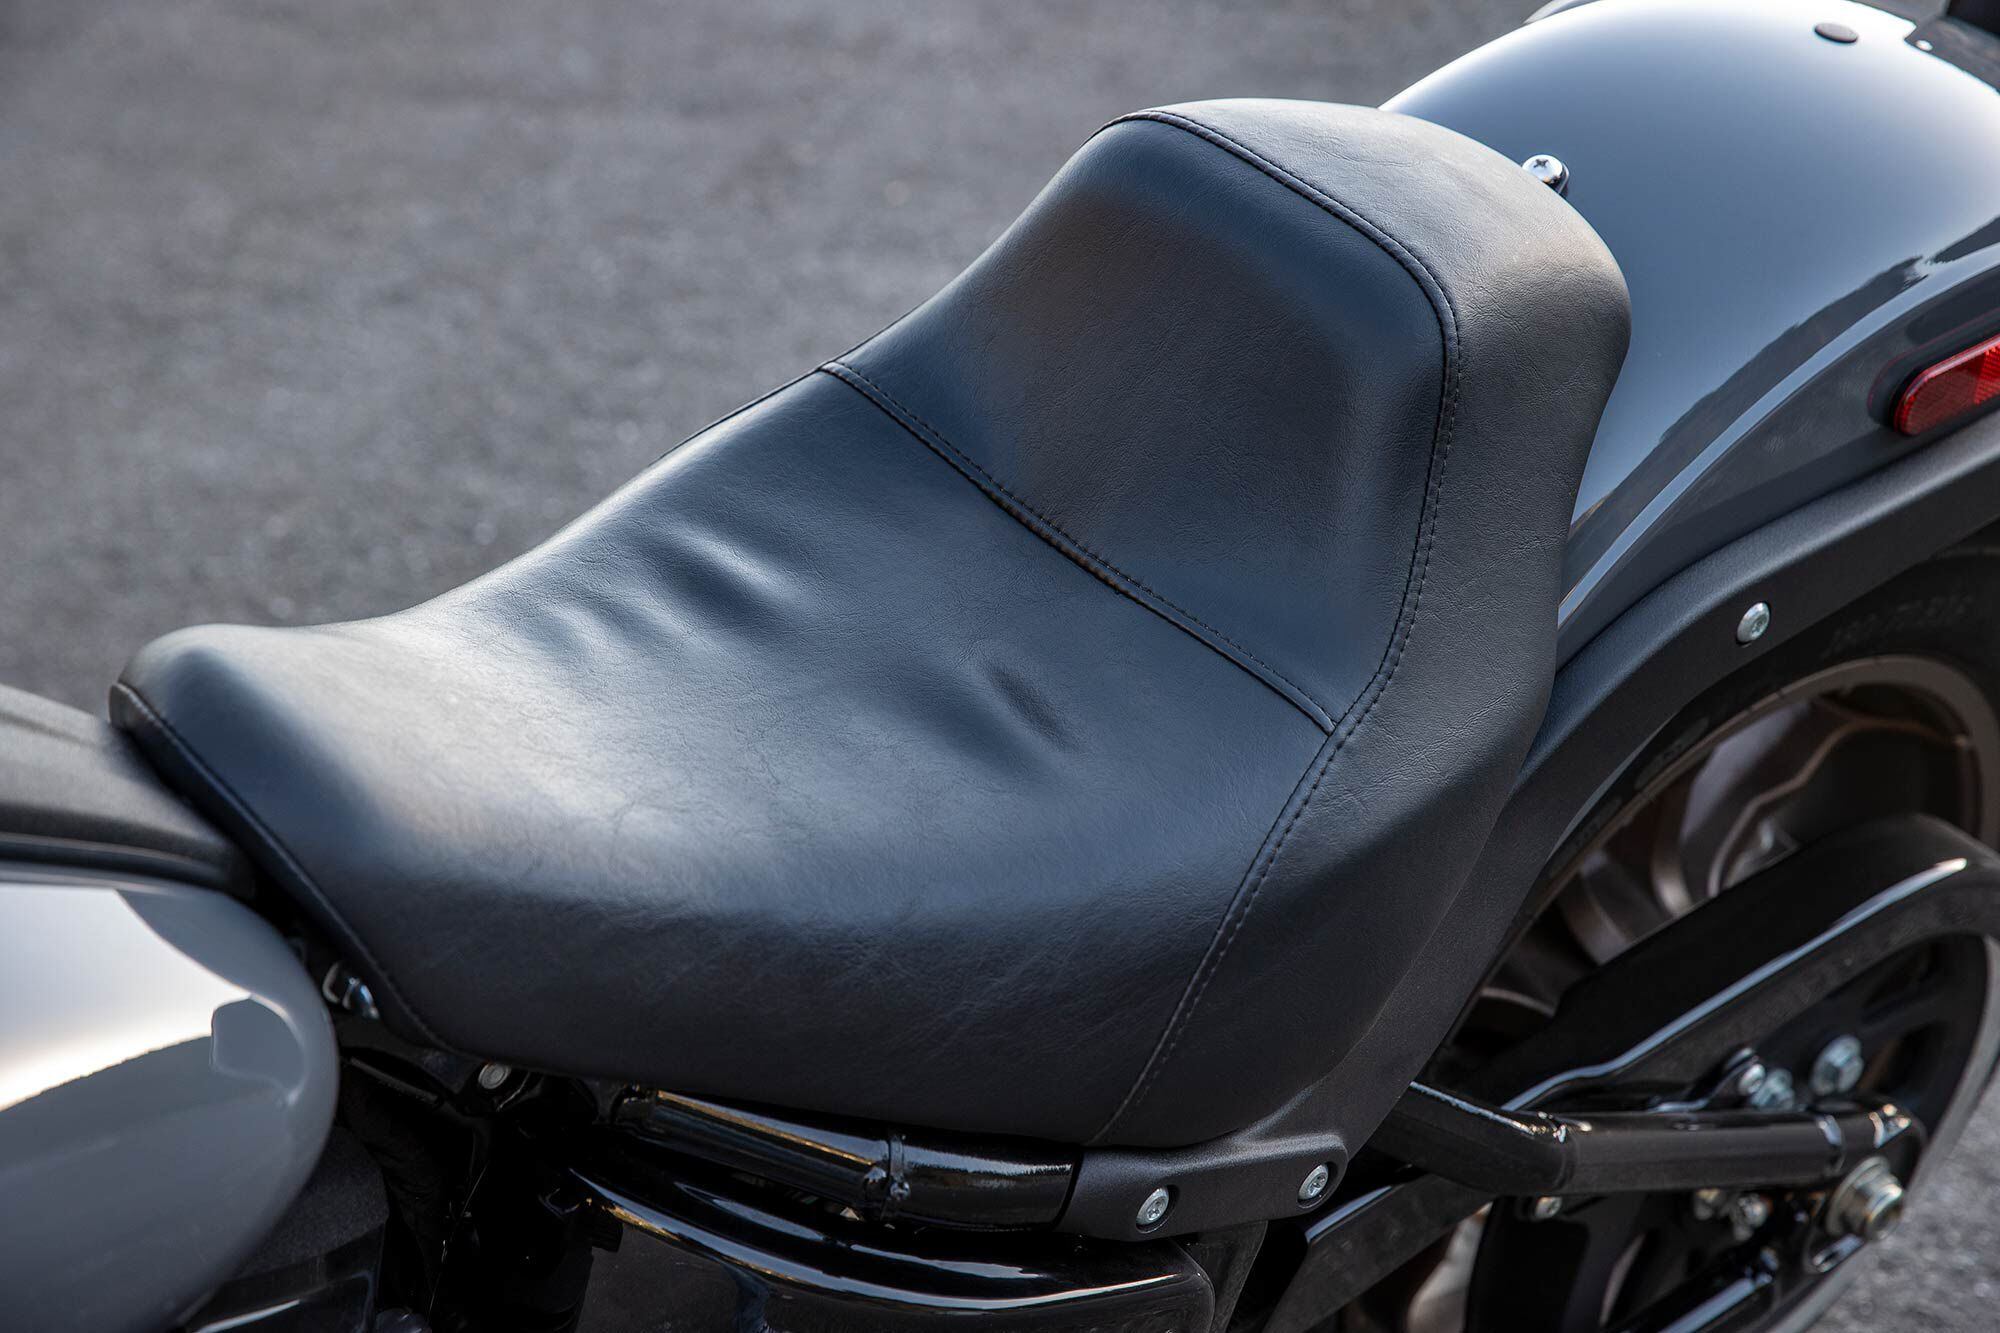 Ergonomics on the FXLRS are tight and aggressive. Some taller riders complain about this seating position and would prefer forward controls.